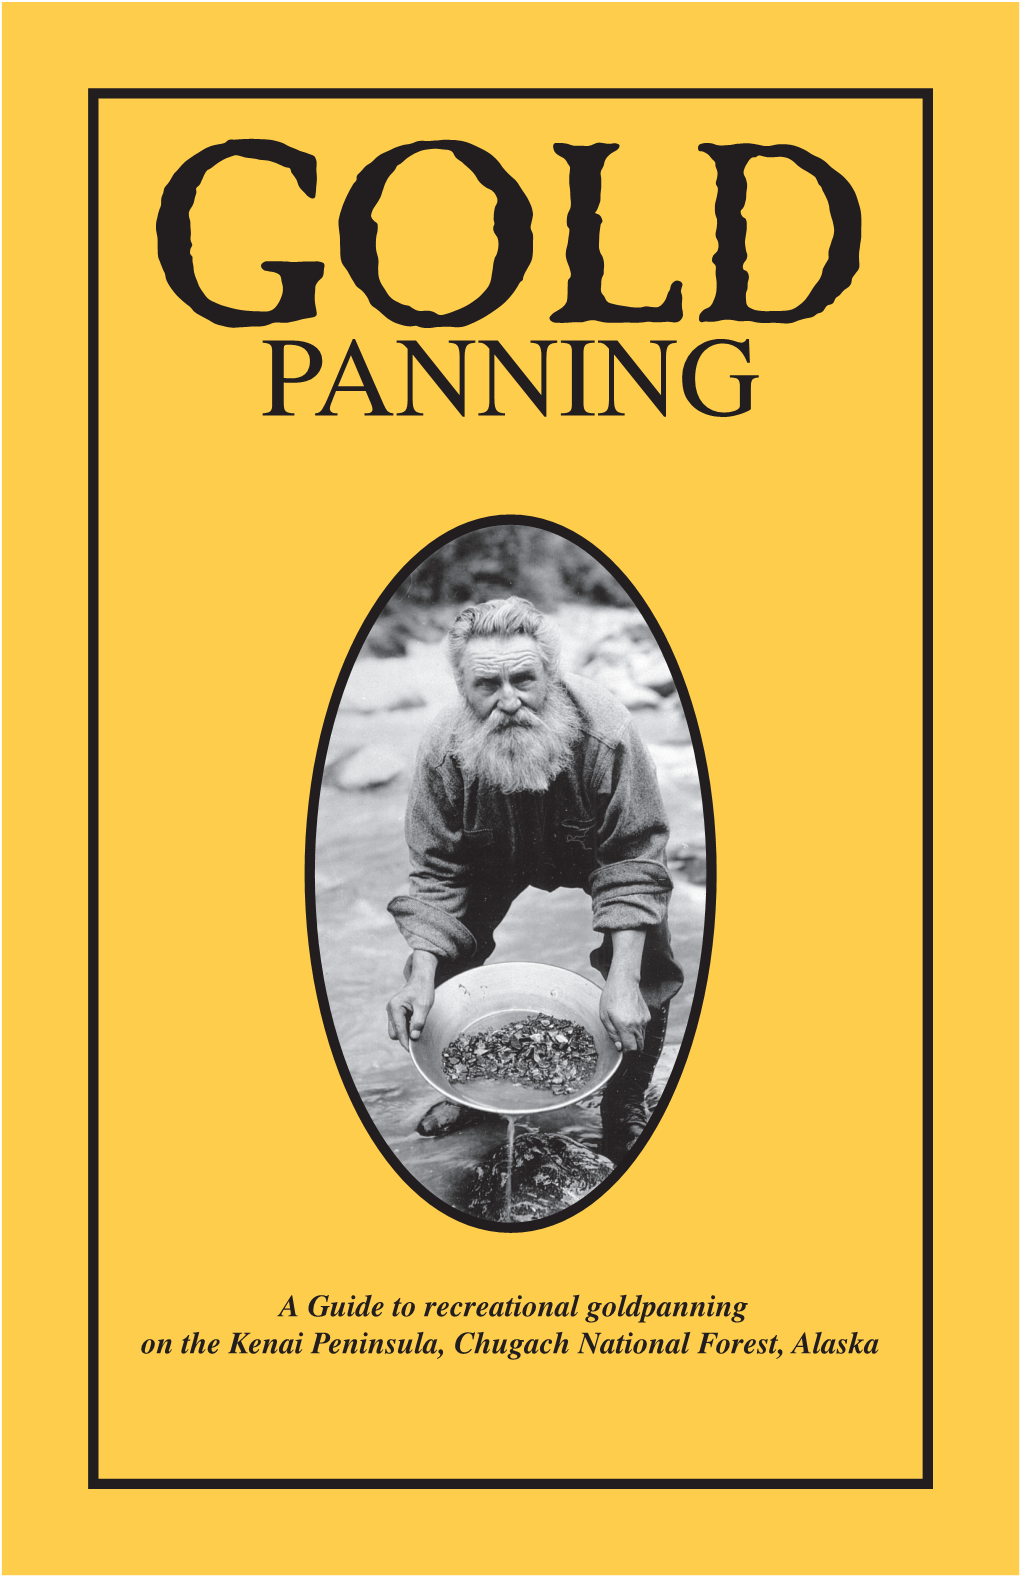 The Gold Panning Booklet